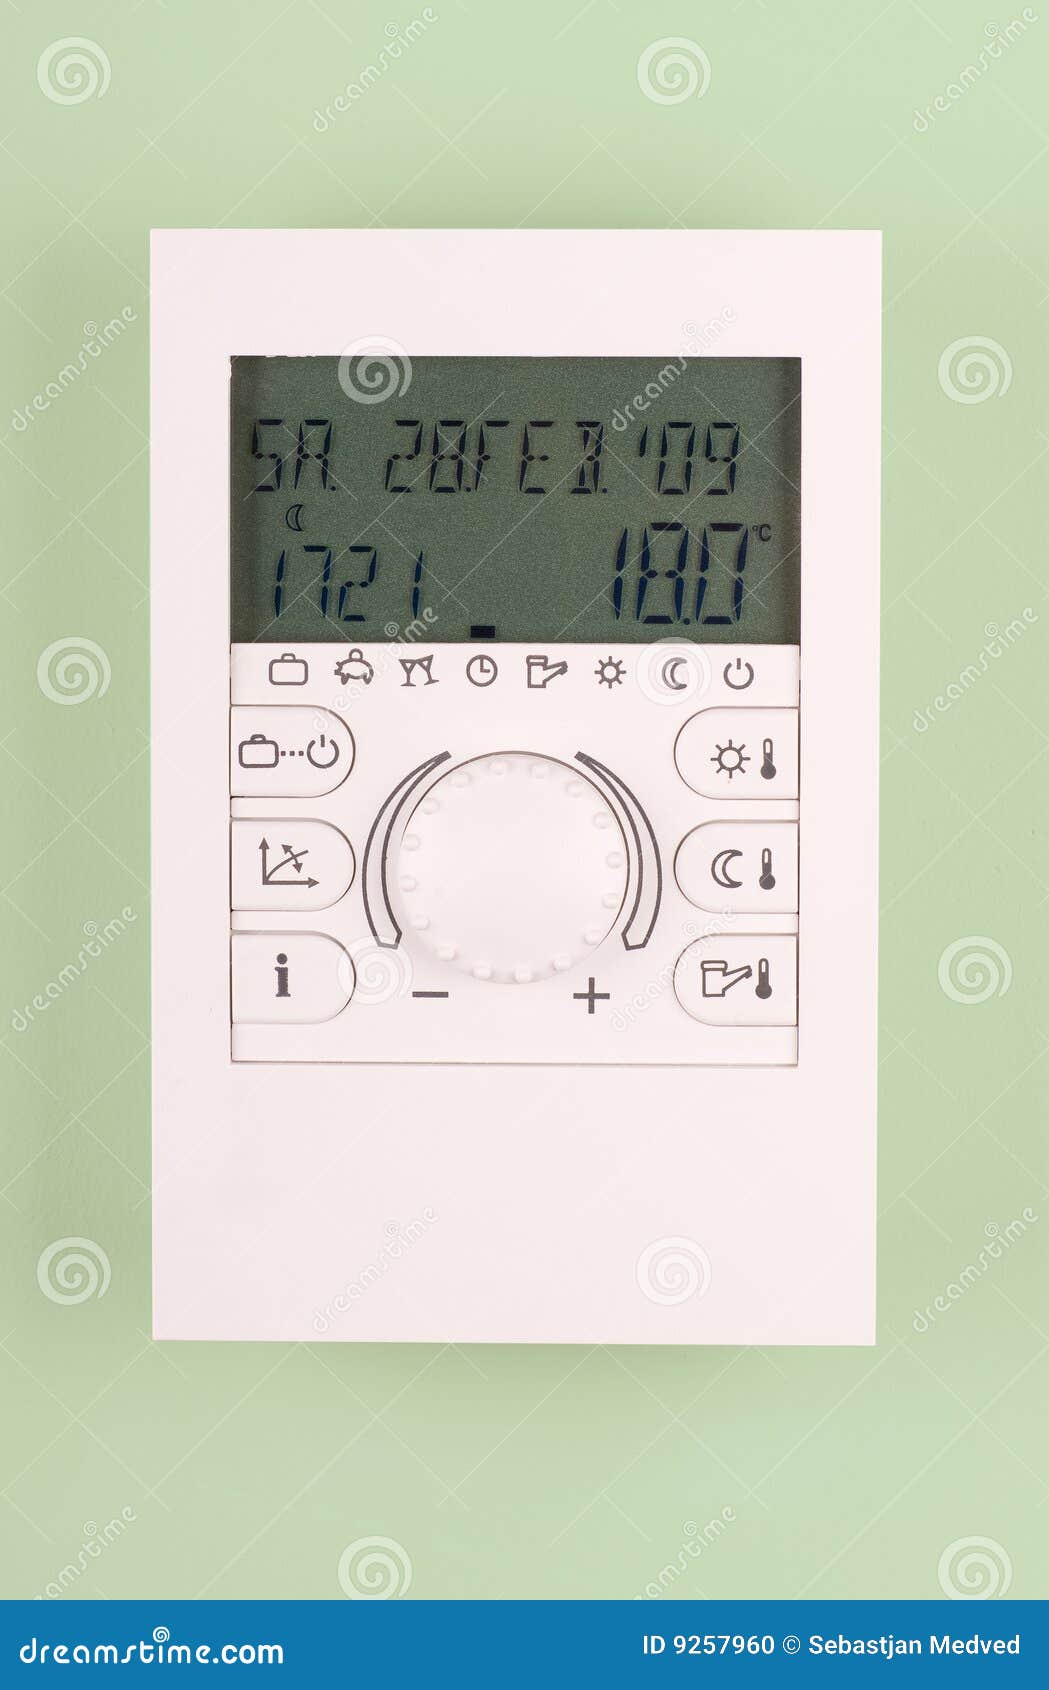 Room thermostate stock photo. Image of room, knob, indoor - 9257960